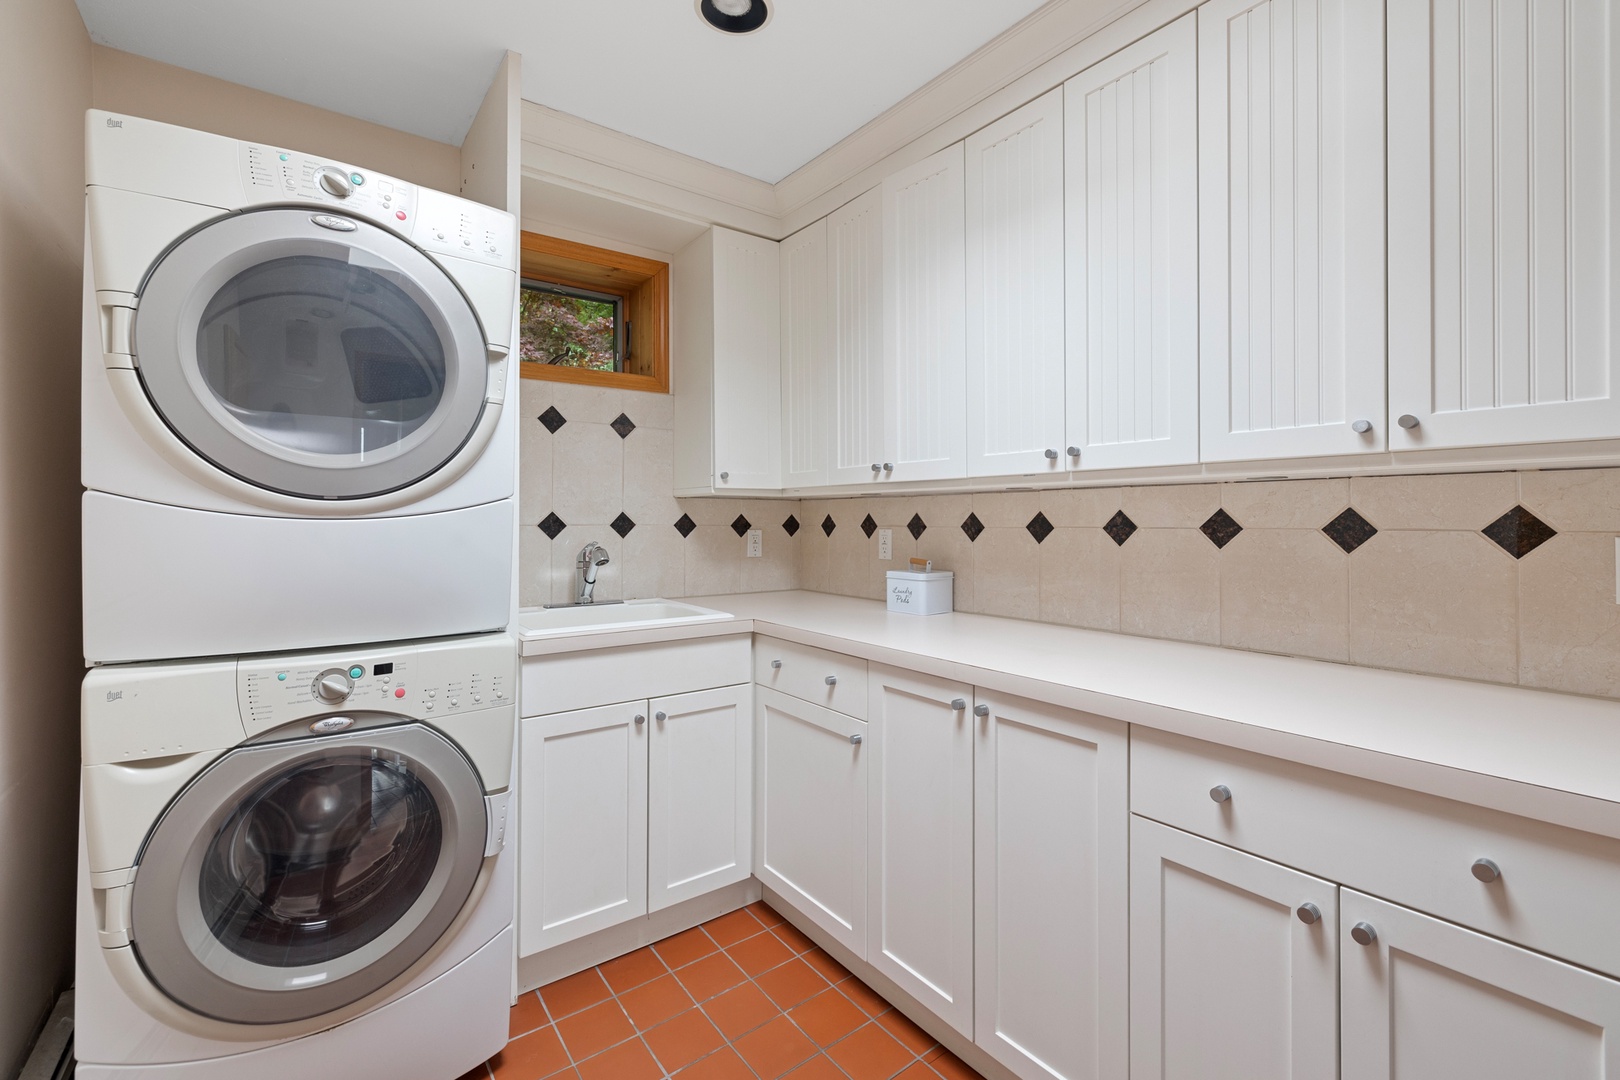 Take care of your laundry needs with ease with the convenient laundry room.